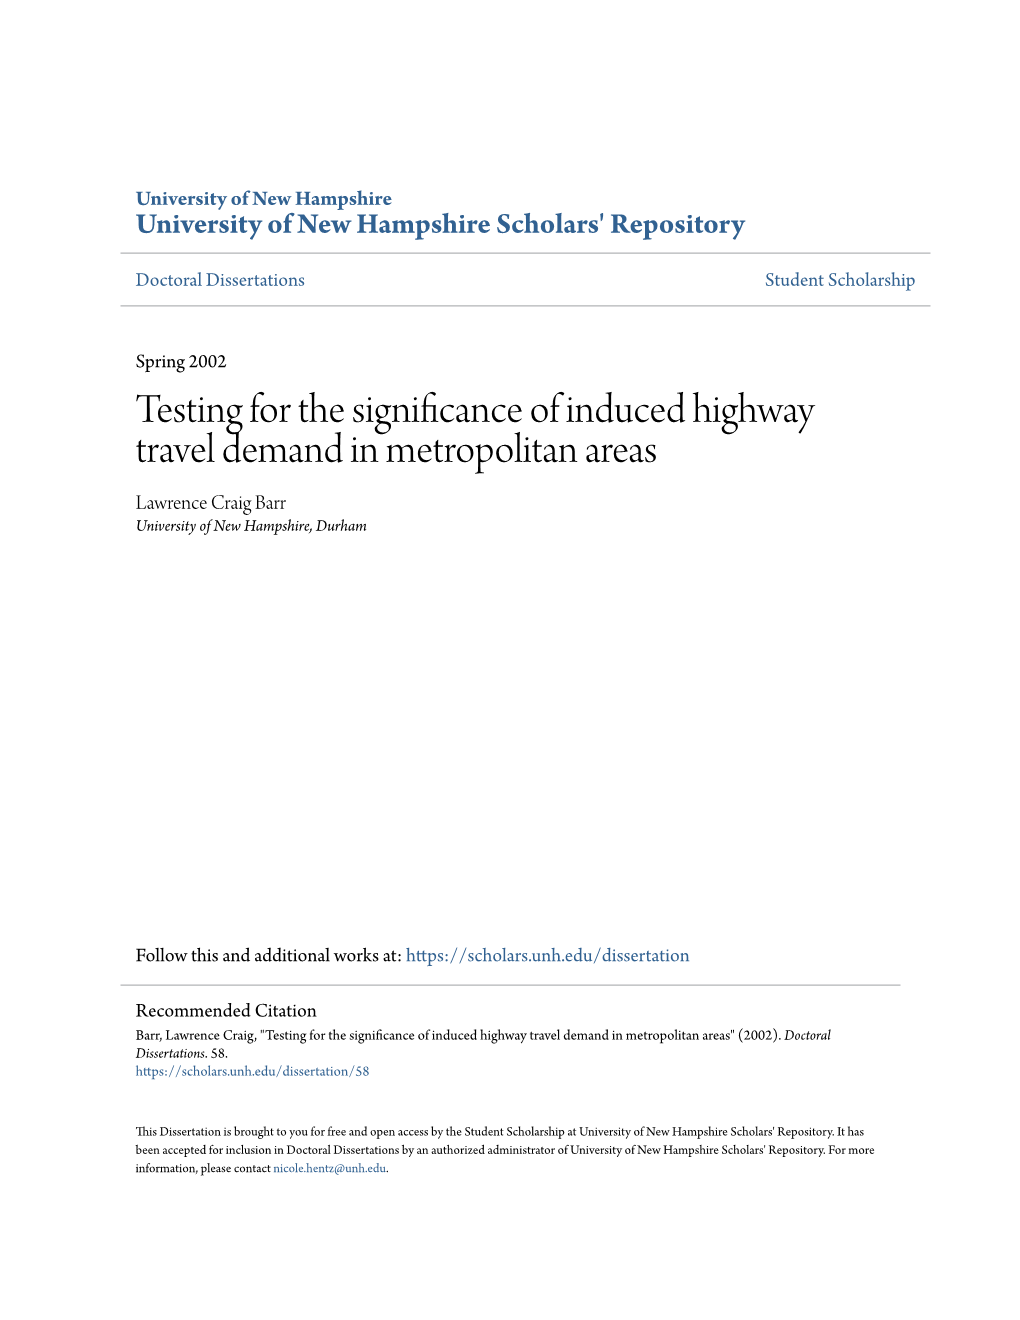 Testing for the Significance of Induced Highway Travel Demand in Metropolitan Areas Lawrence Craig Barr University of New Hampshire, Durham